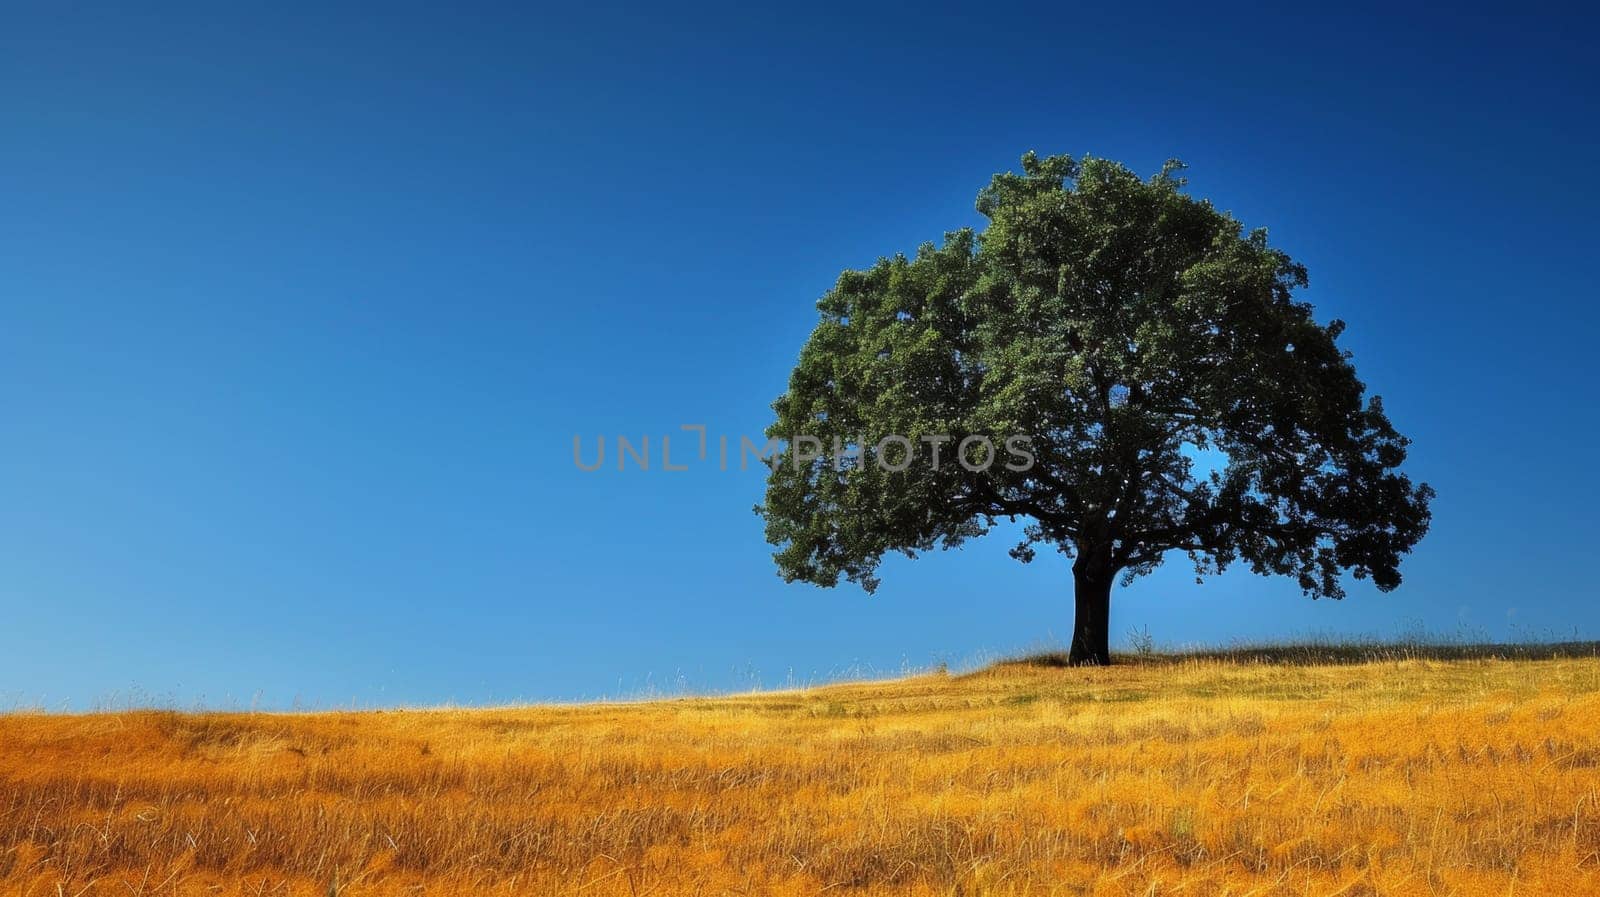 A lone tree in a field with grass and sky behind it, AI by starush